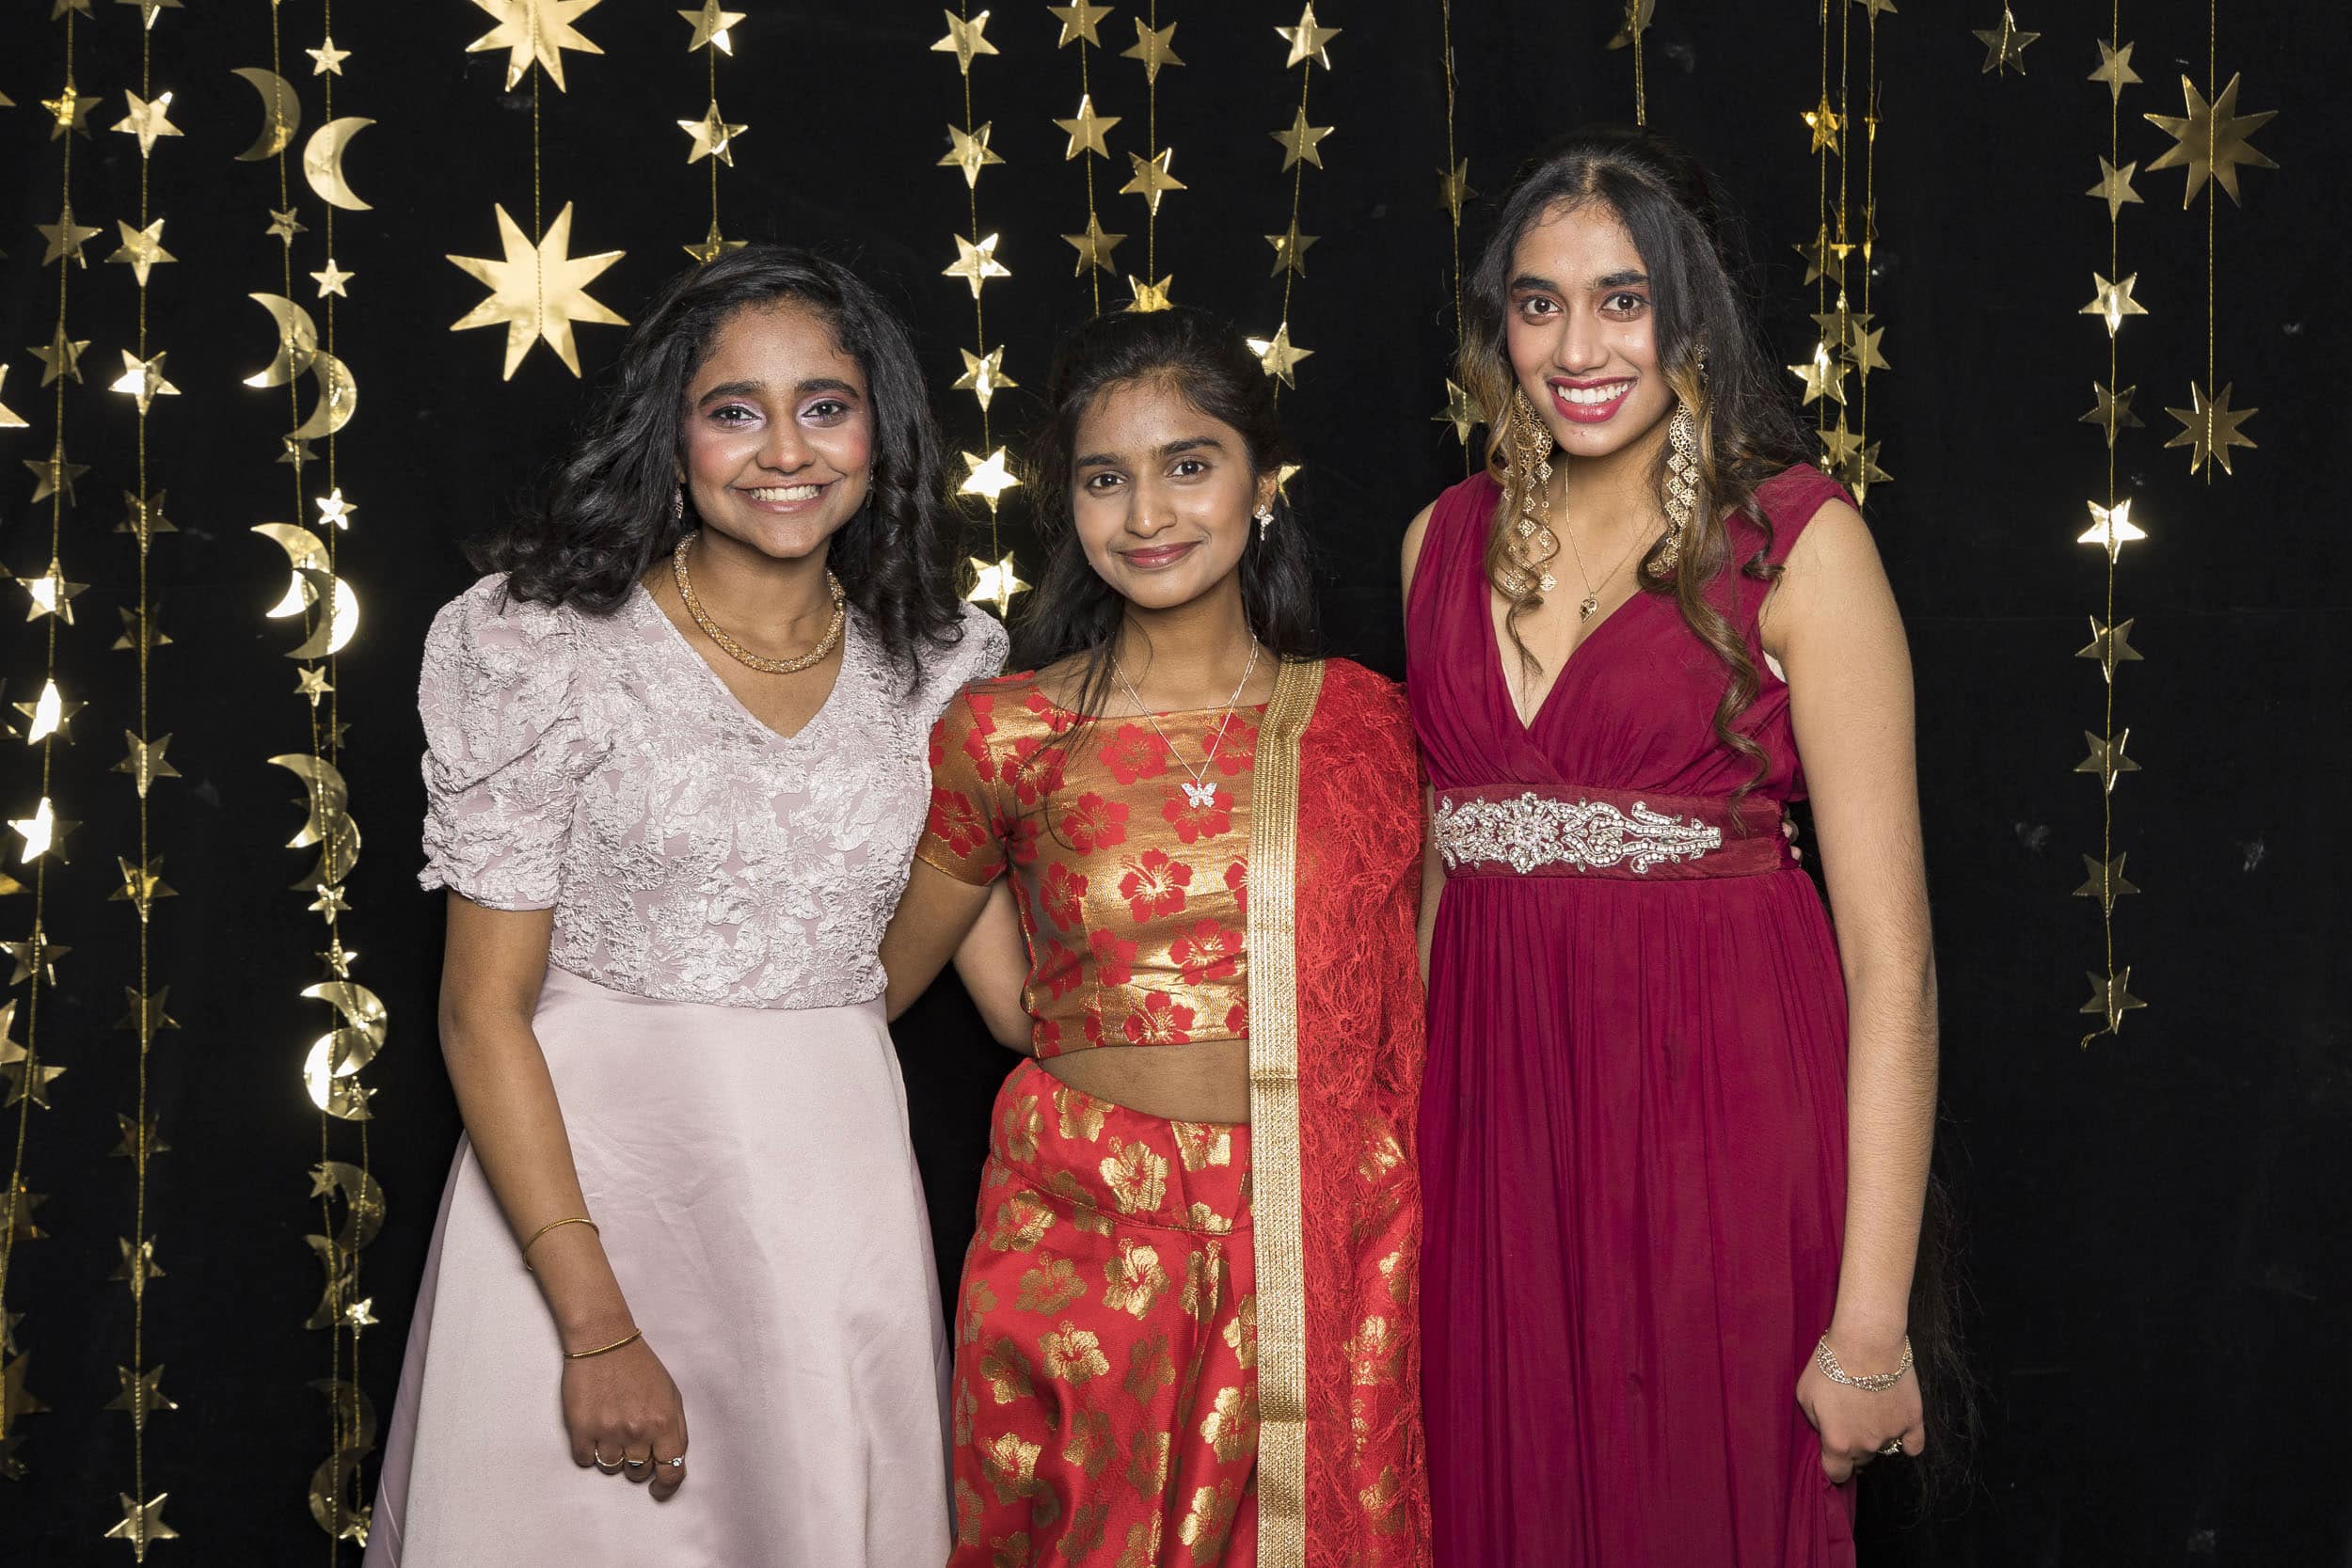 Indian students at their high school formal dressed in special outfits.